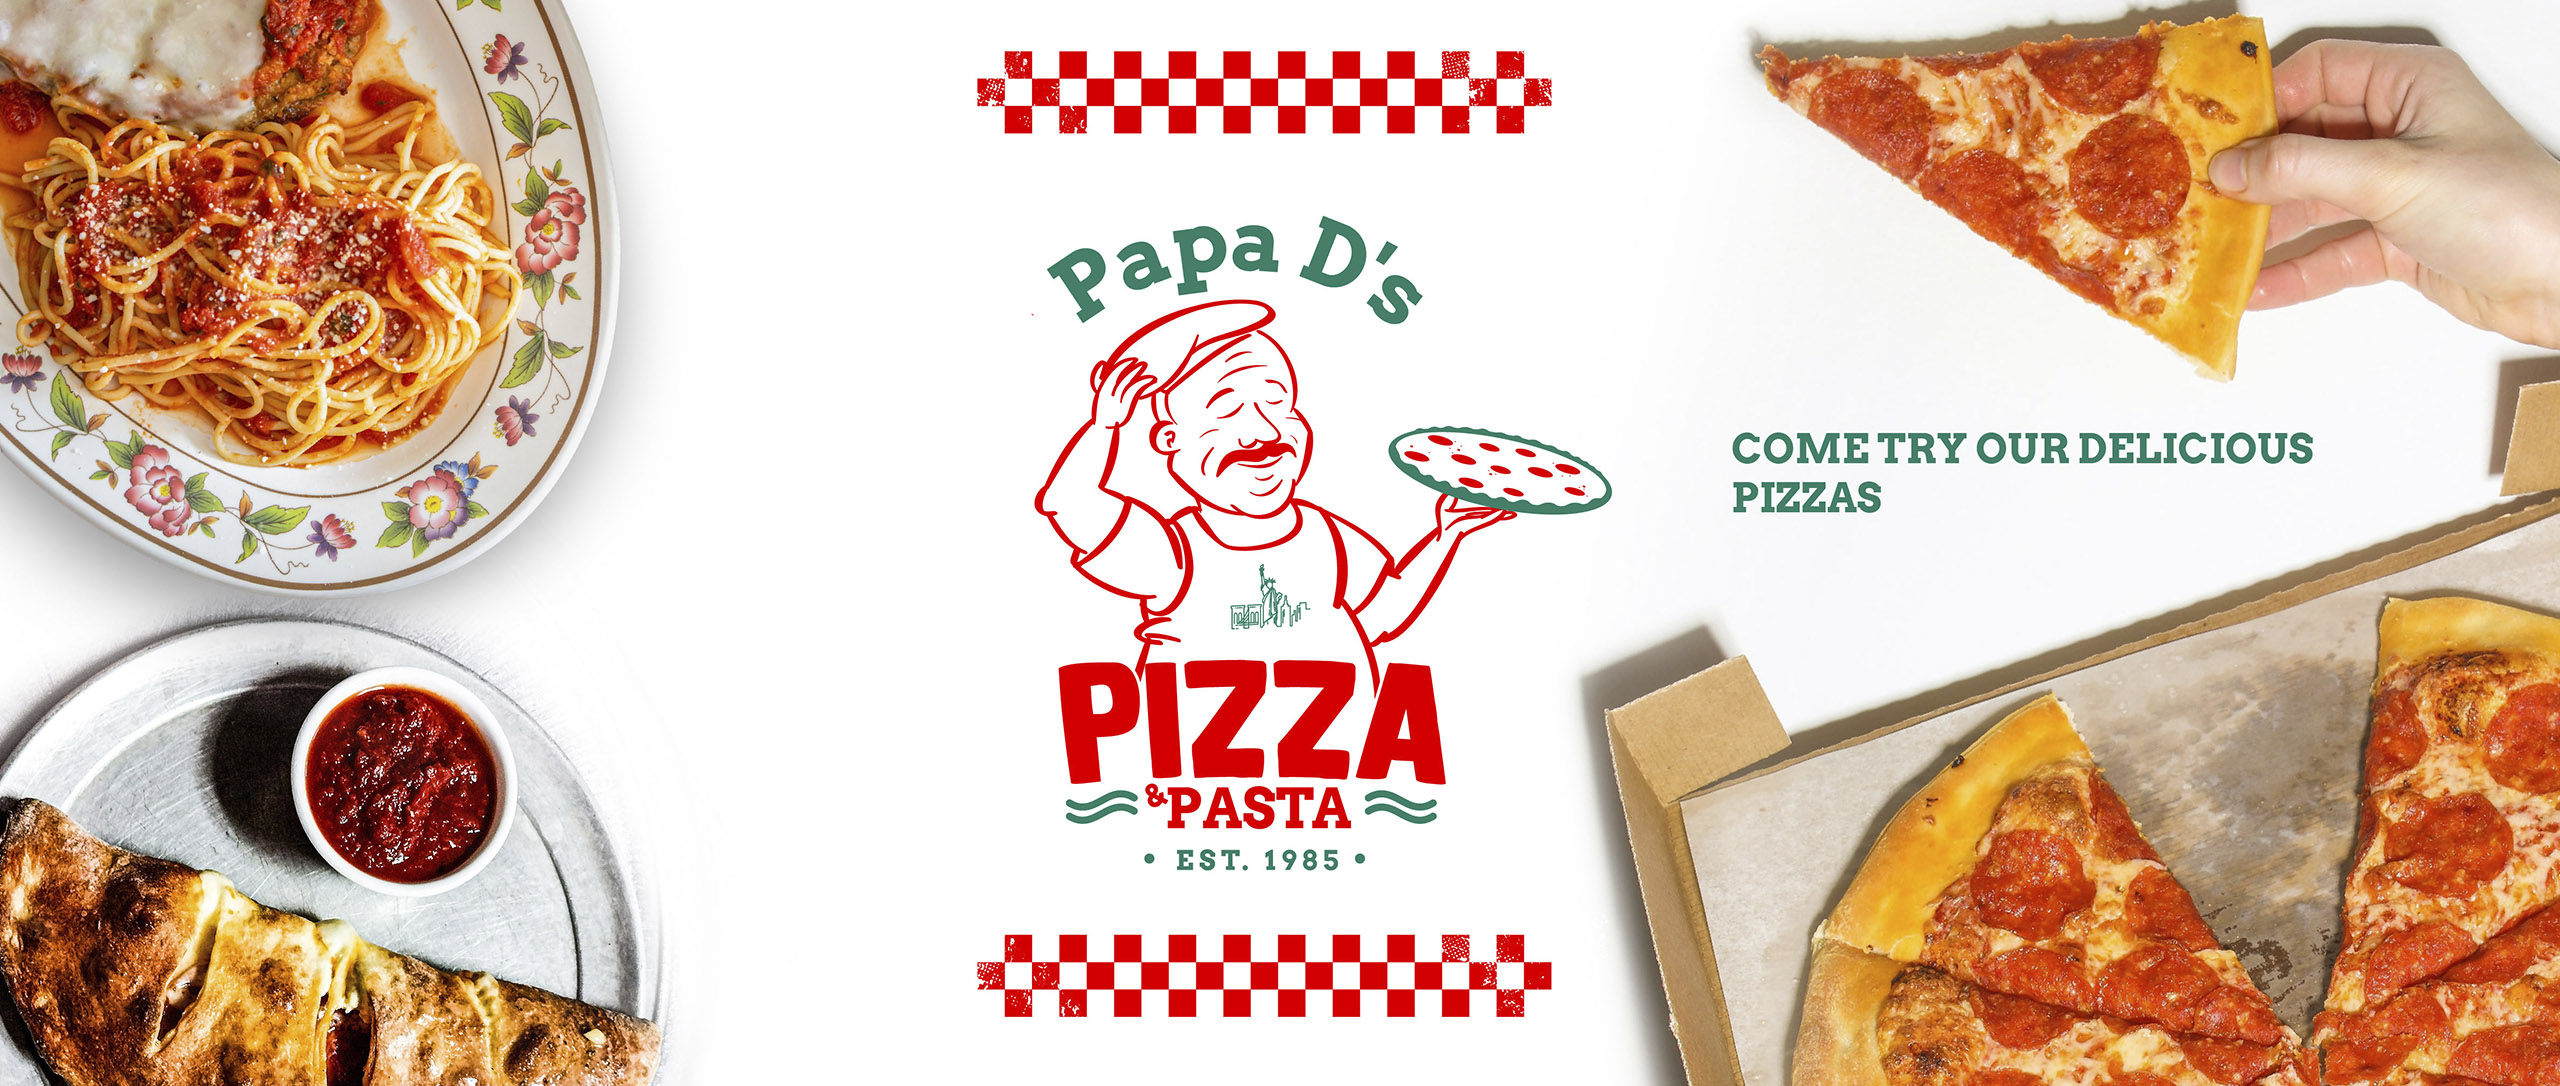 Papa D Pizza - Enjoy our delicious NY style pizza